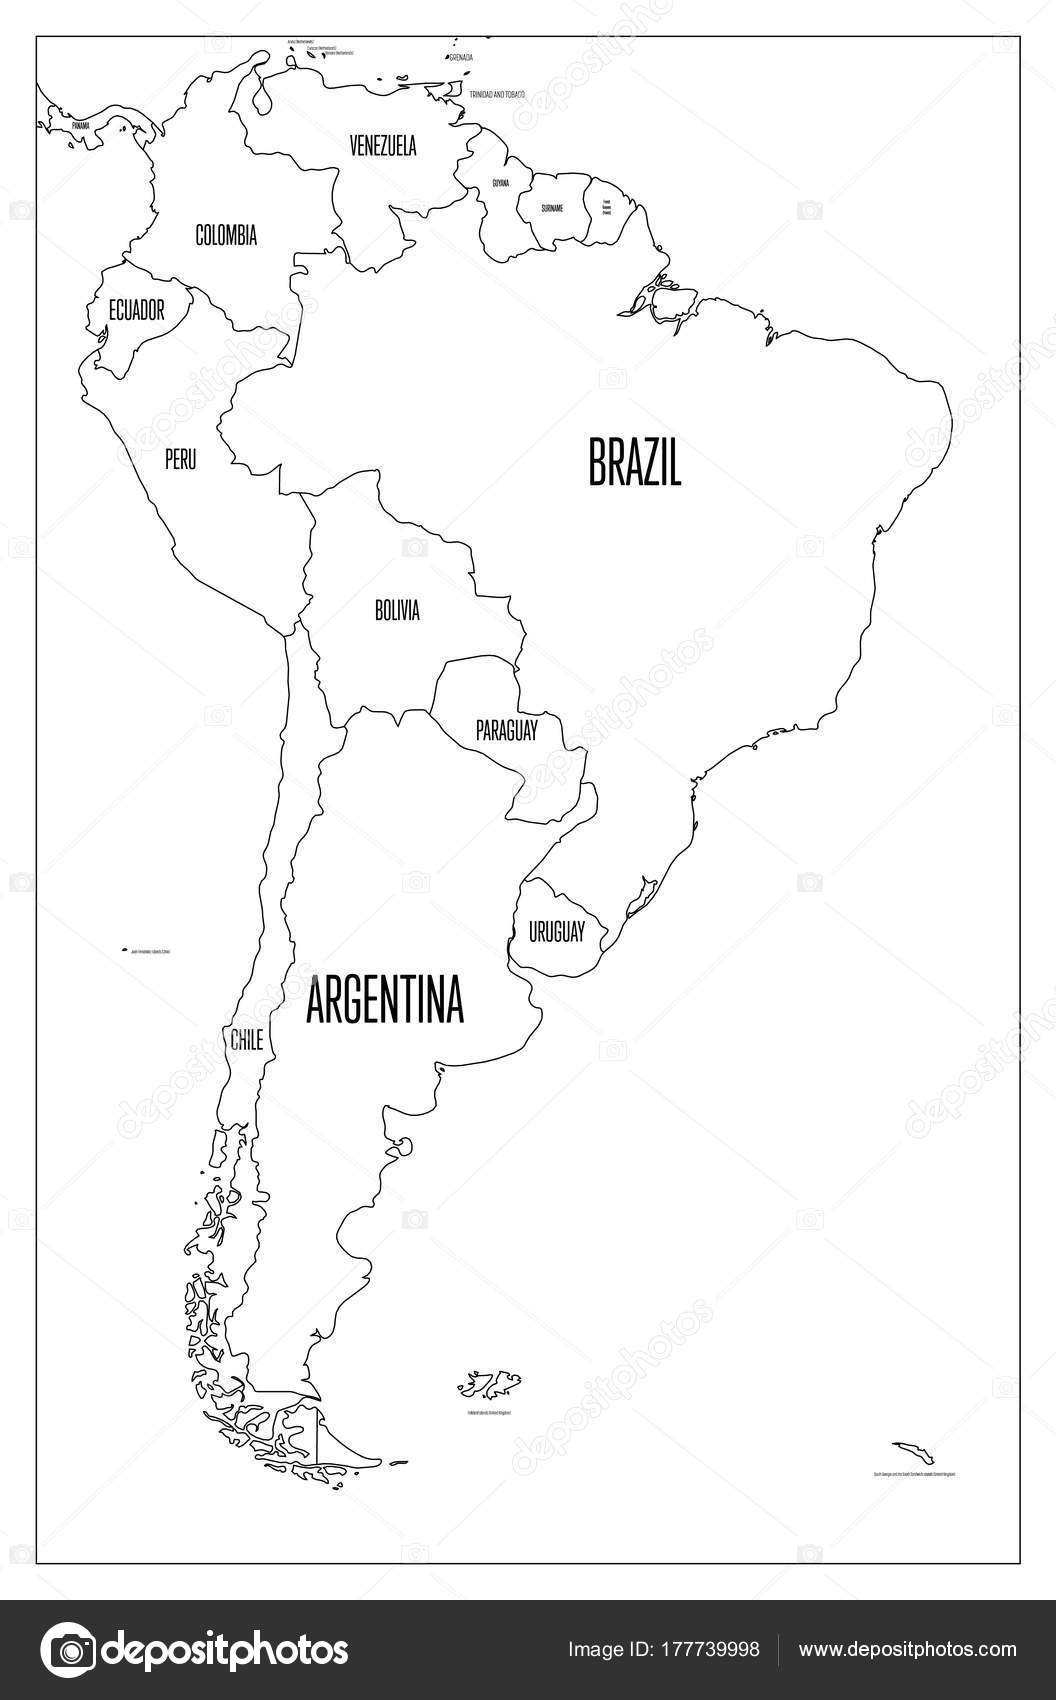 South america political map outline | Political map of South America ...